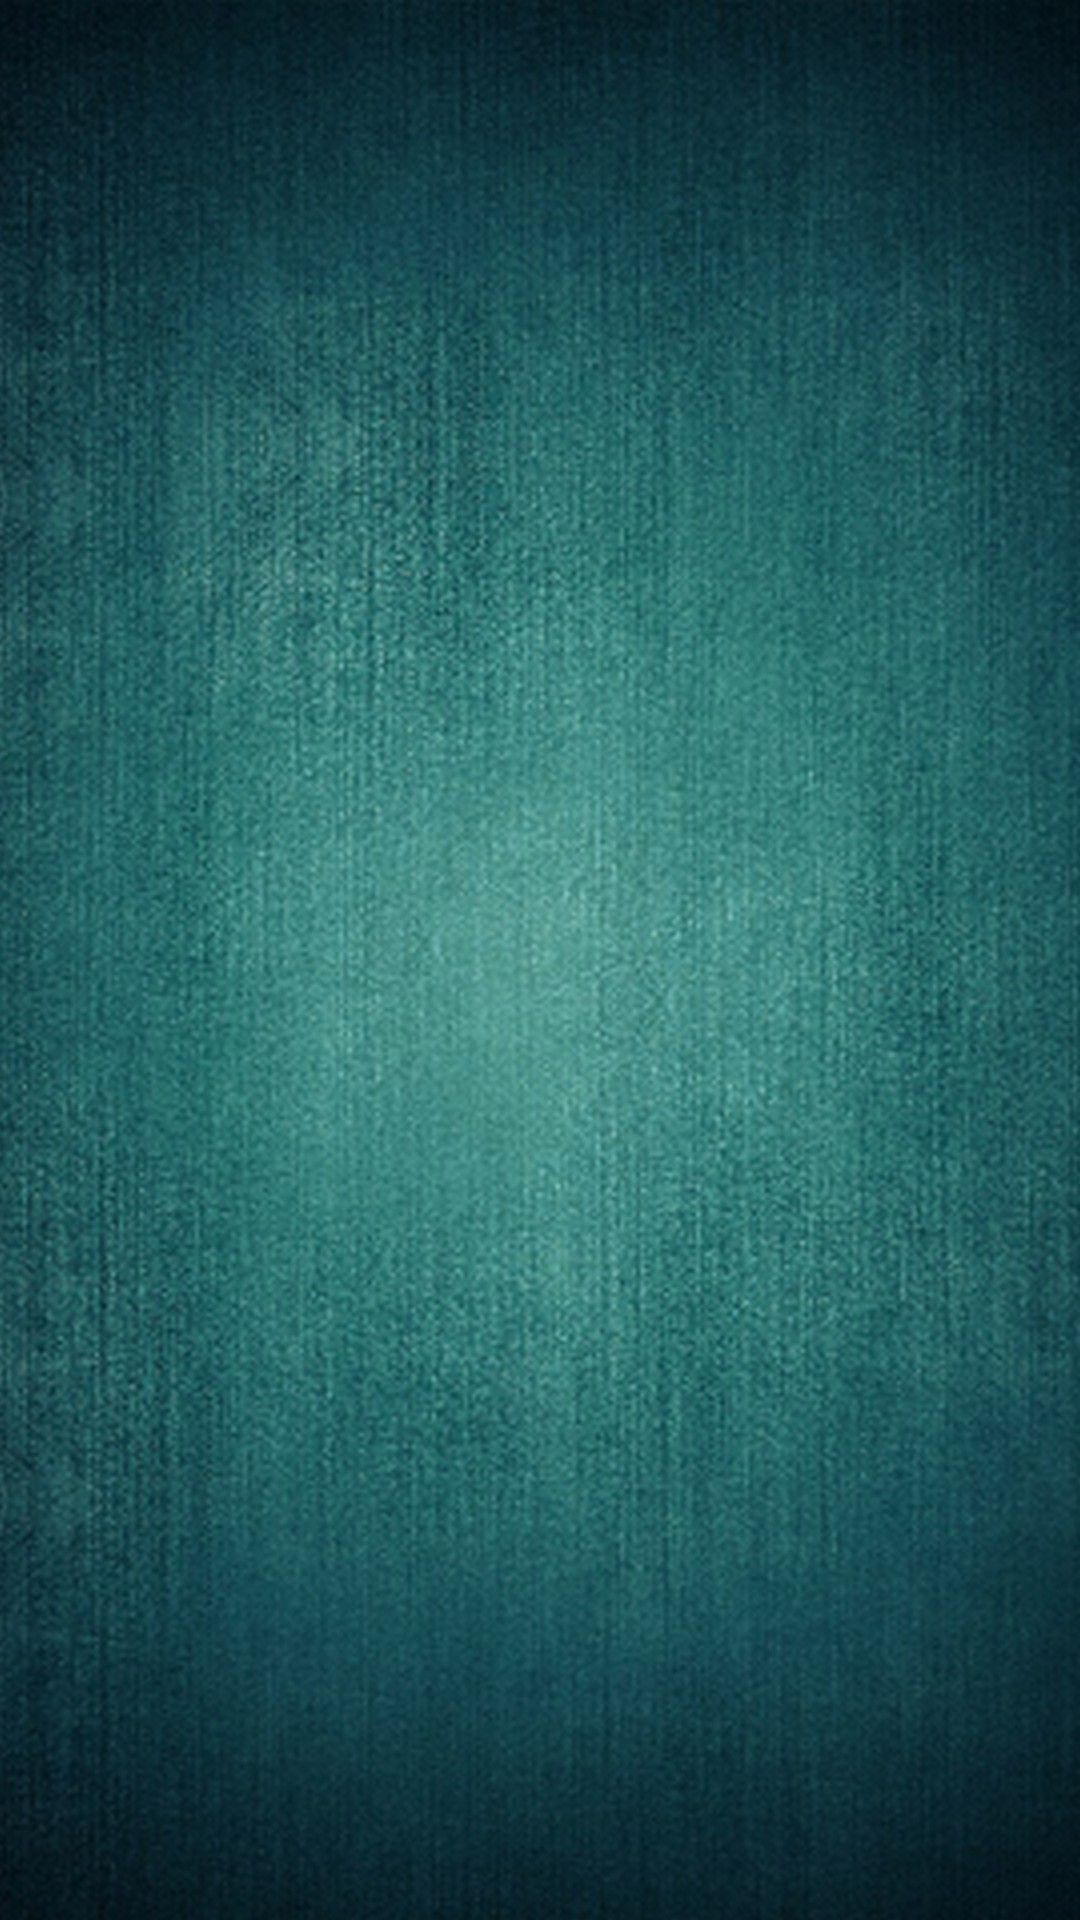 iPhone 7 Wallpaper Teal Color with resolution 1080X1920 pixel. You can make this wallpaper for your iPhone 5, 6, 7, 8, X backgrounds, Mobile Screensaver, or iPad Lock Screen